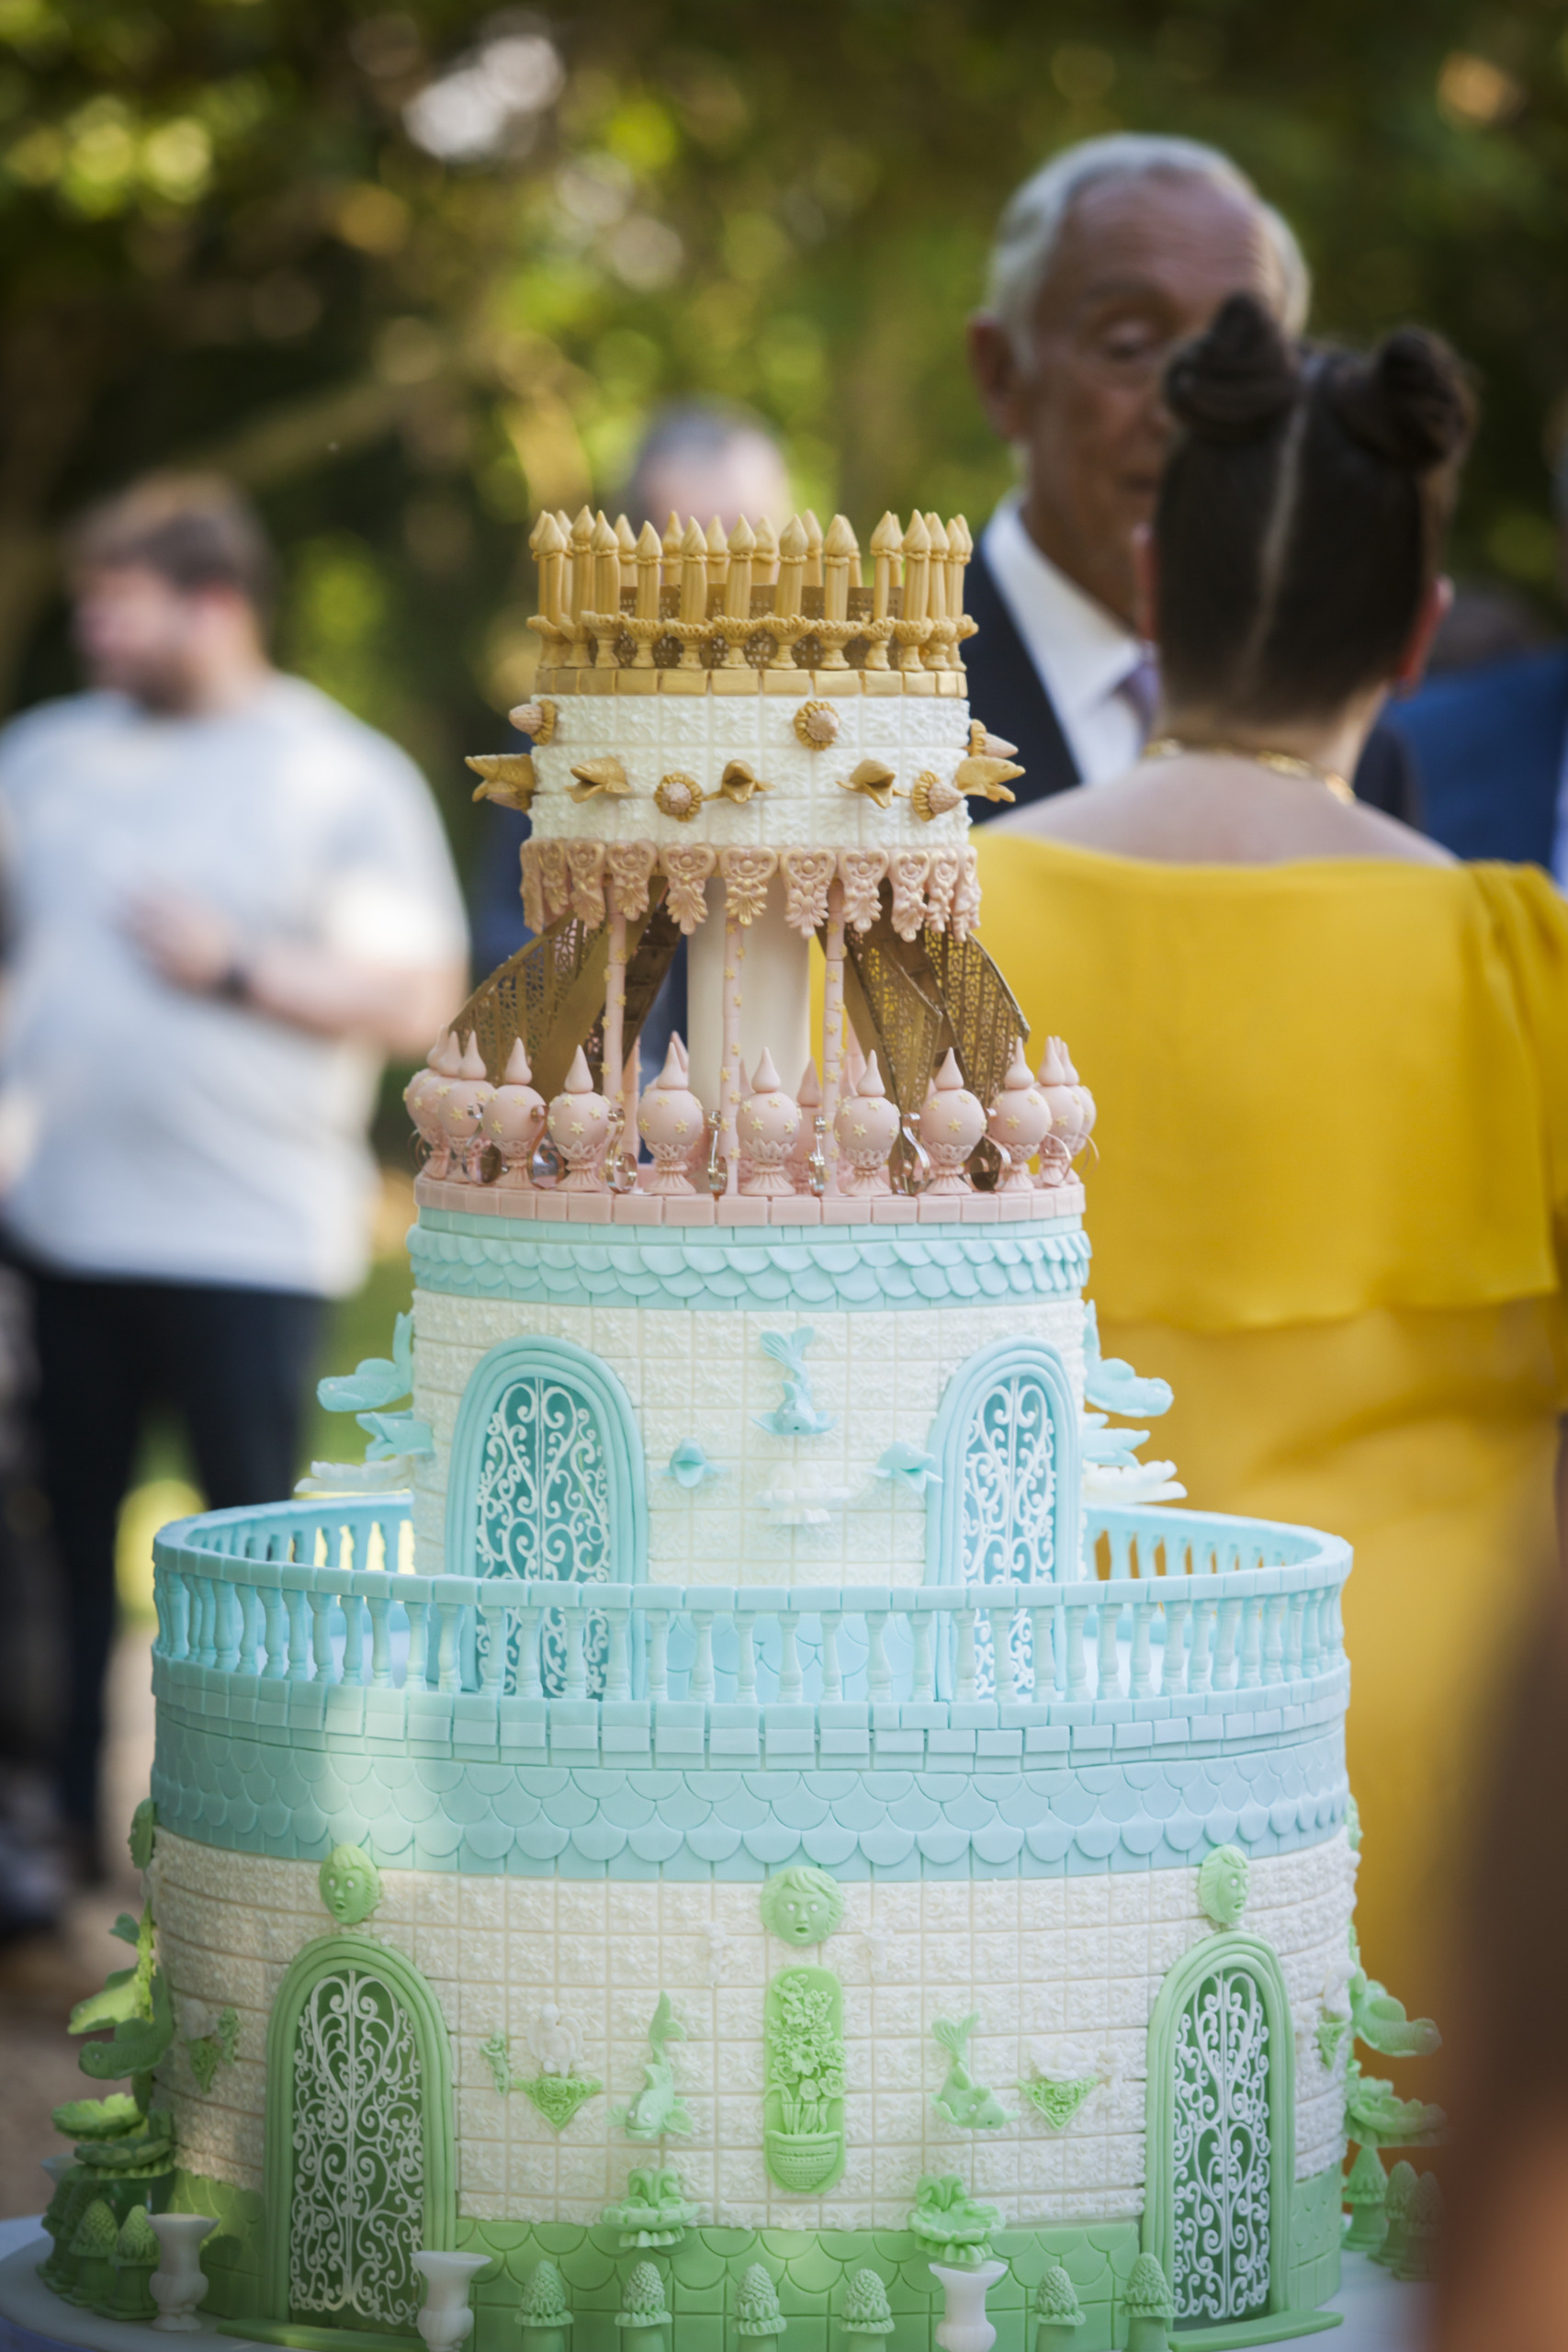 The Wedding Cake By Yevnig at Waddesdon Manor, sits in the fore-front of the image with Lord Rothschild and Joana Vasconcelos standing behind.